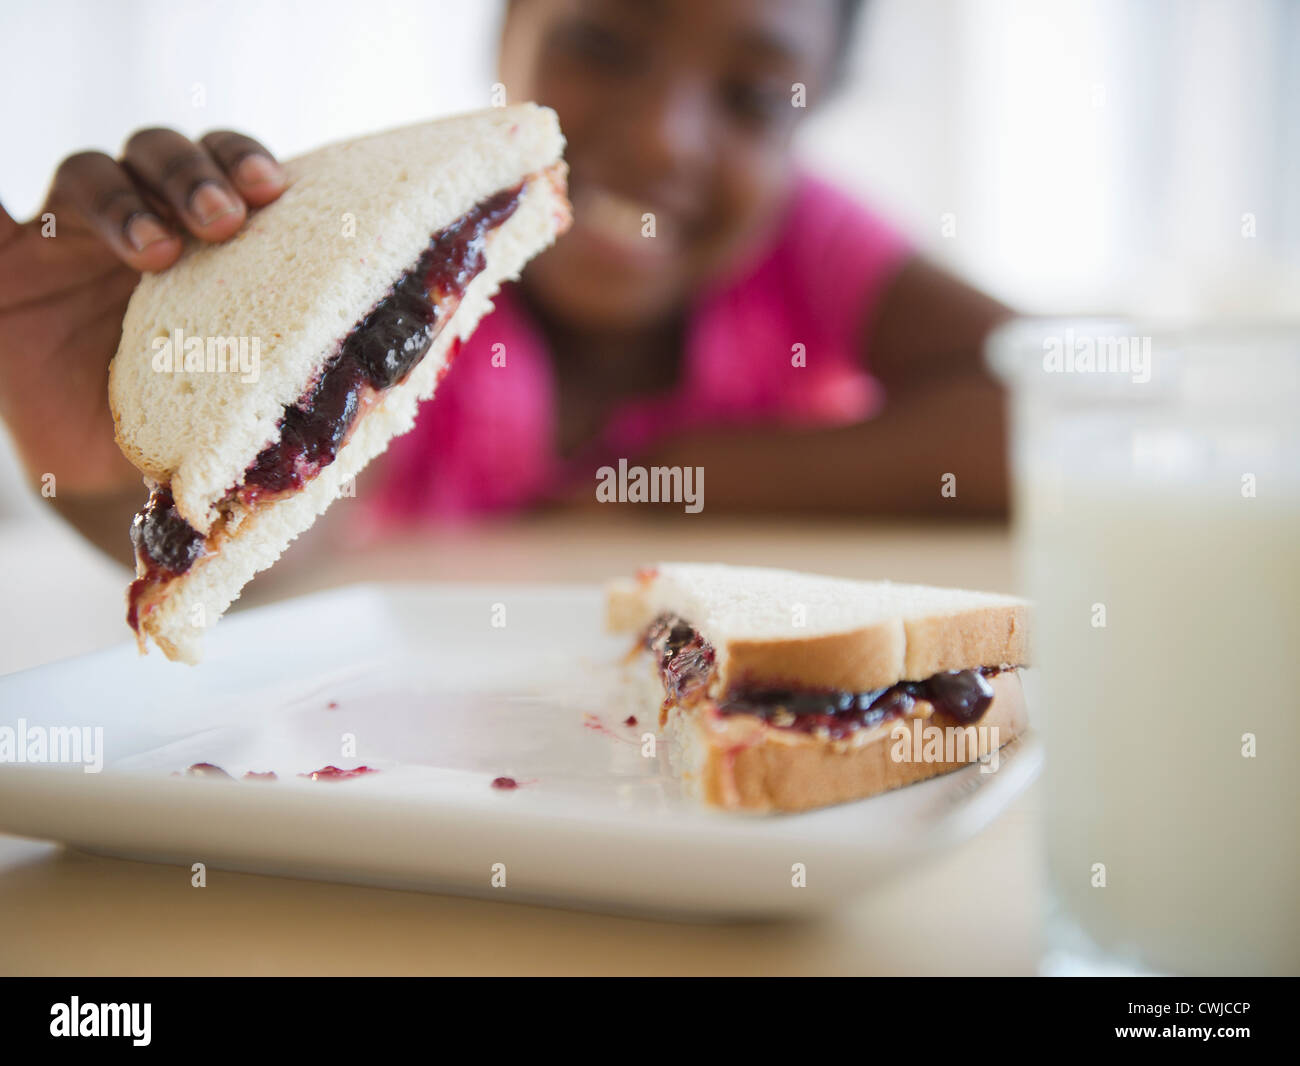 Black girl eating peanut butter and jelly sandwich Stock Photo